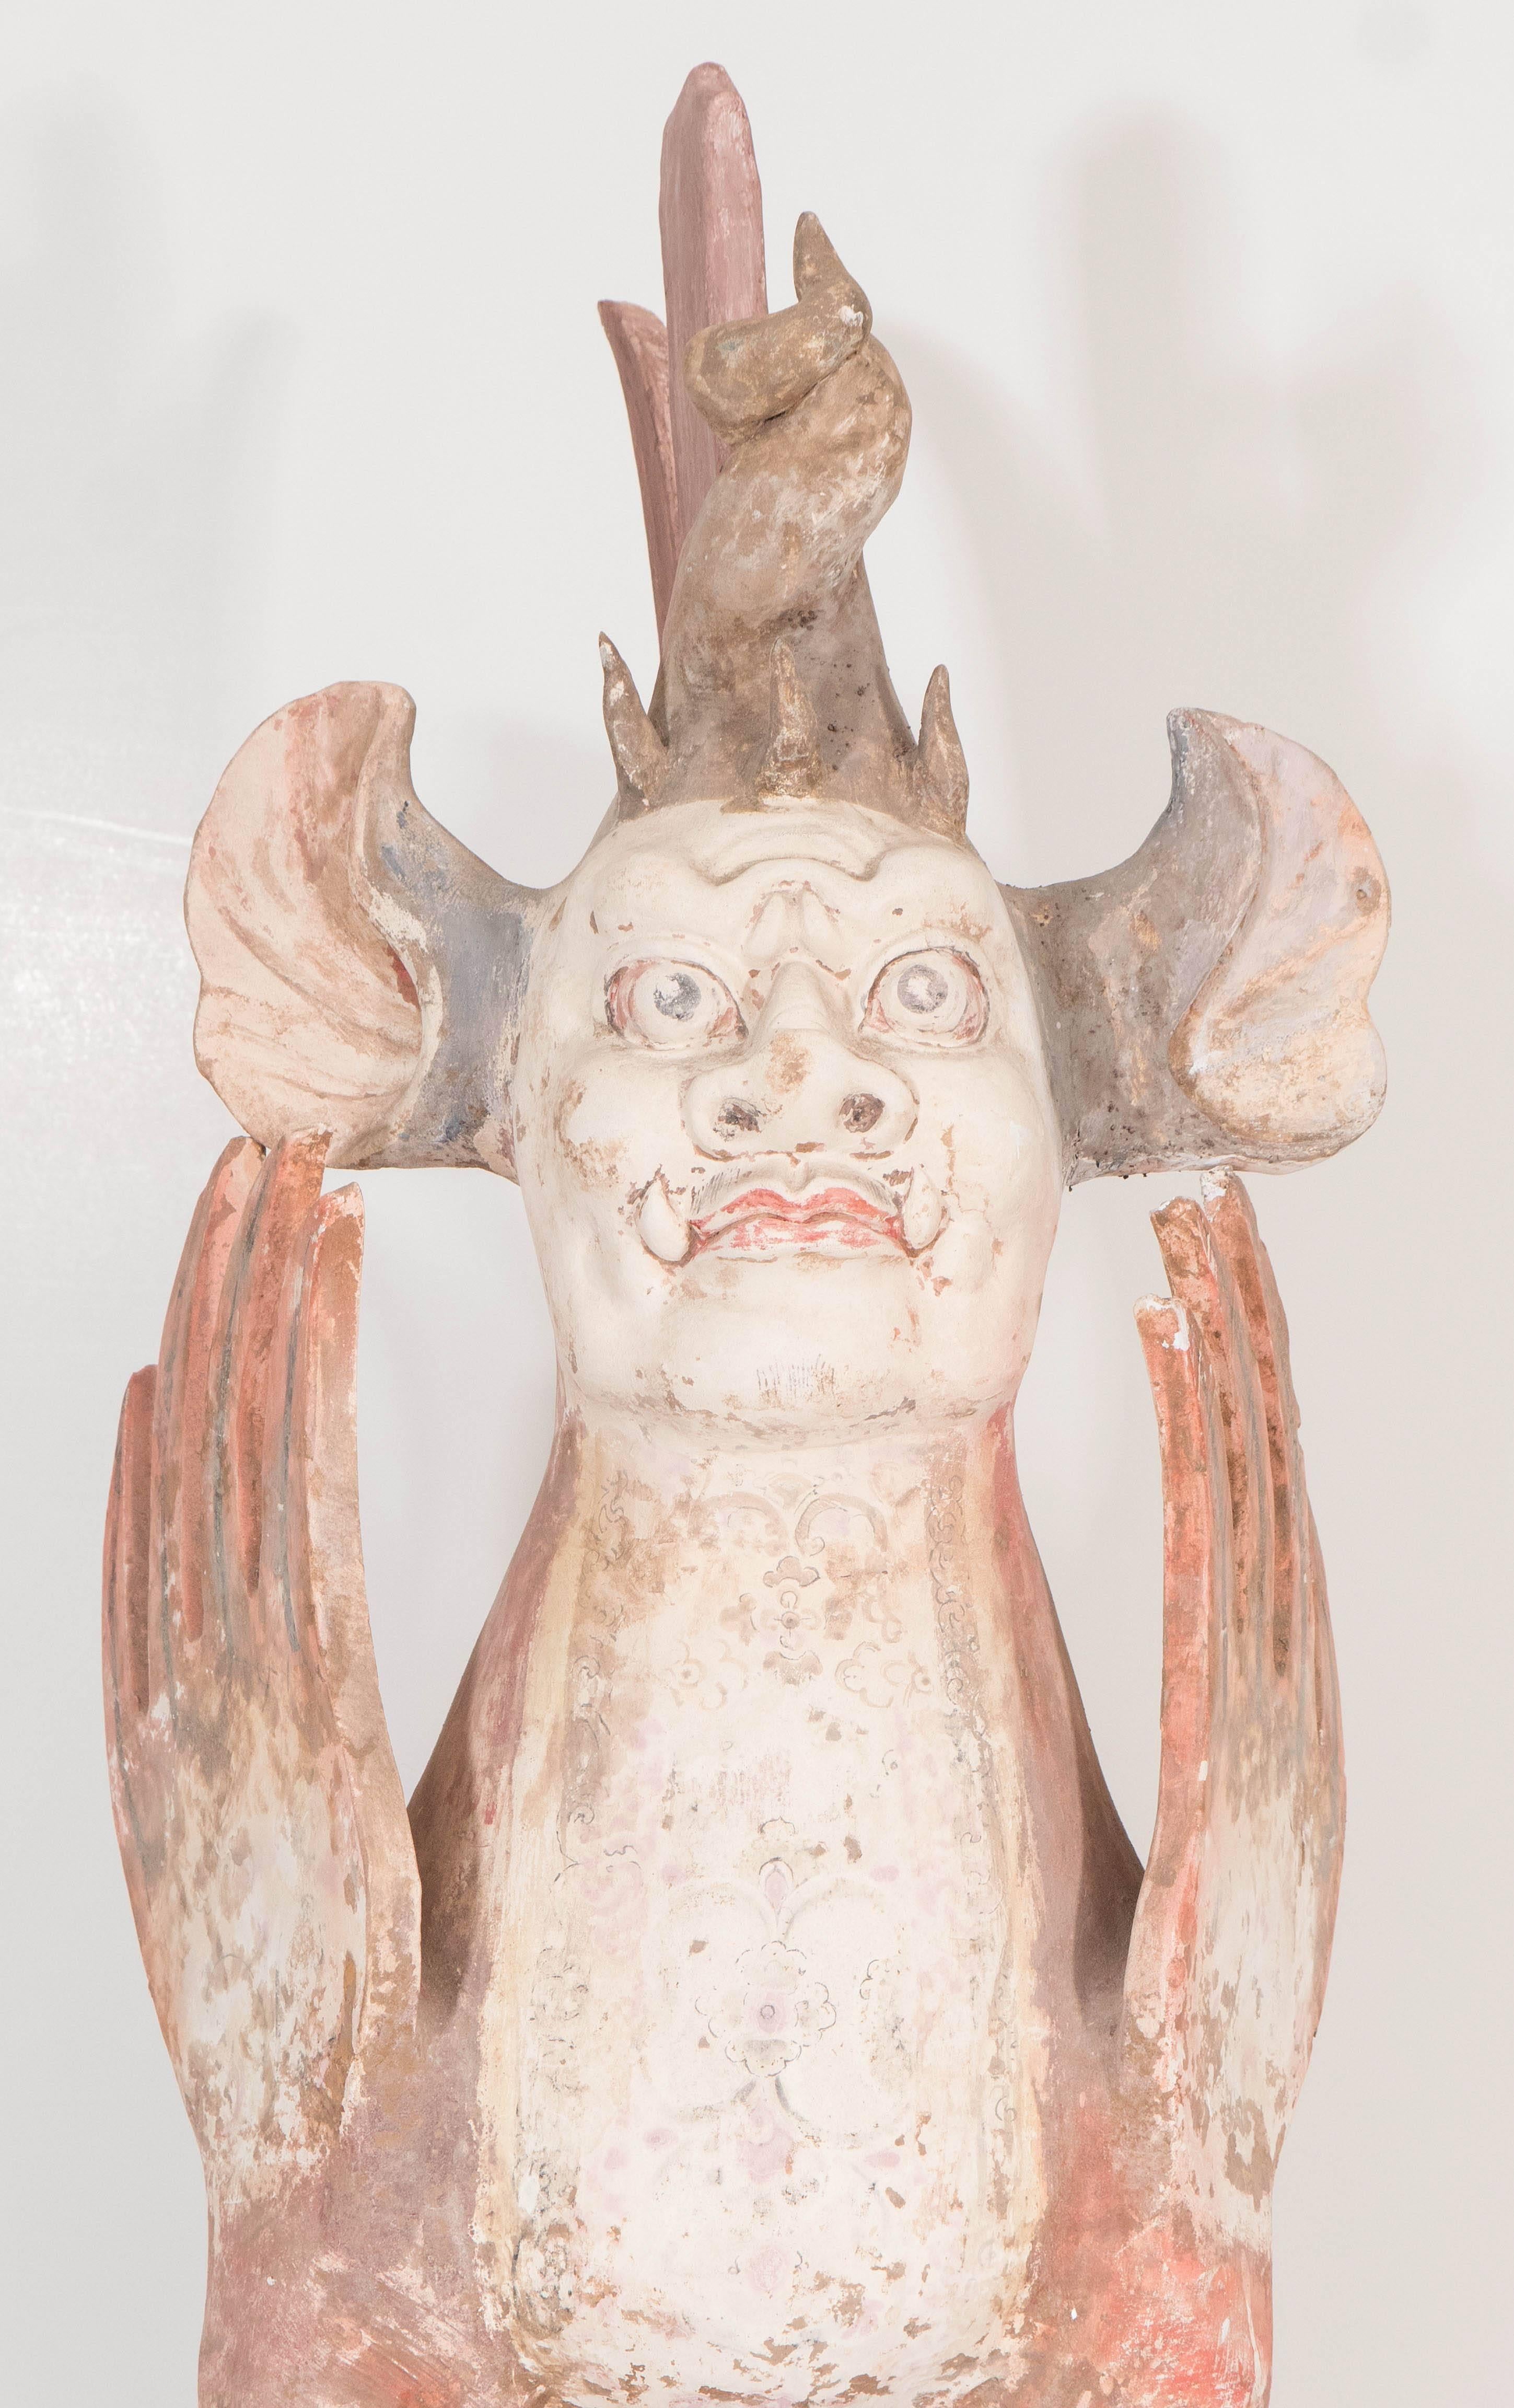 This pair of ancient Chinese earth spirits, or zhenmushou (grave-quelling beasts), in unglazed pottery, which date back to the Tang Dynasty, were considered guardians of tombs, their fearsome visage used to ward off intruders, as well as prevent the